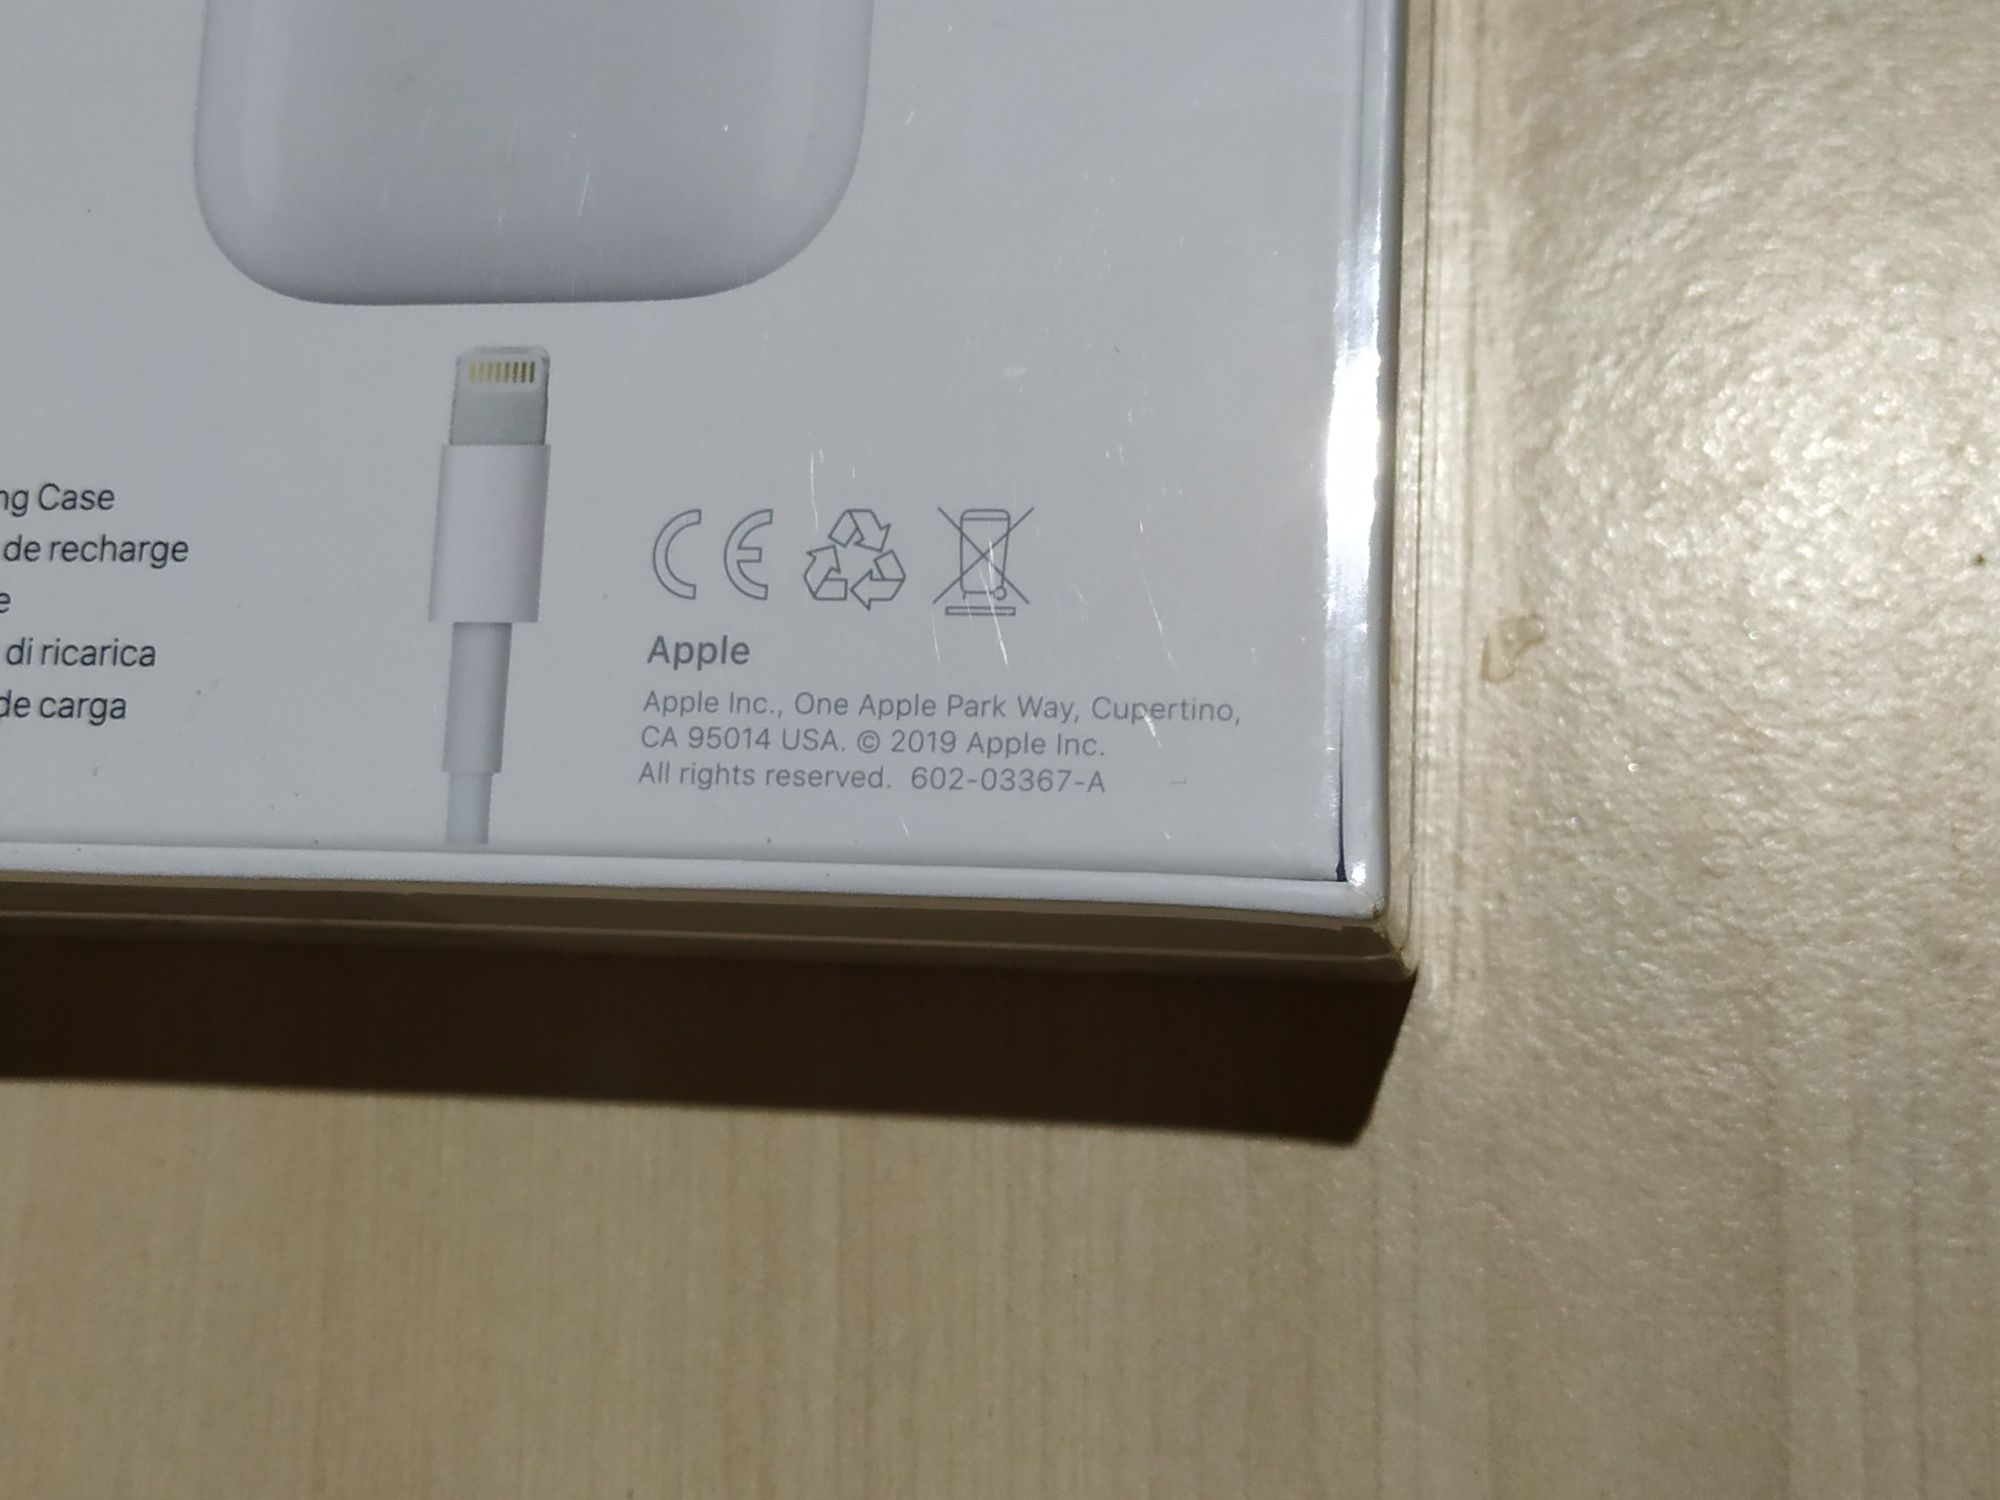 Apple Airpods 2 With Charging Case A2031 A1602